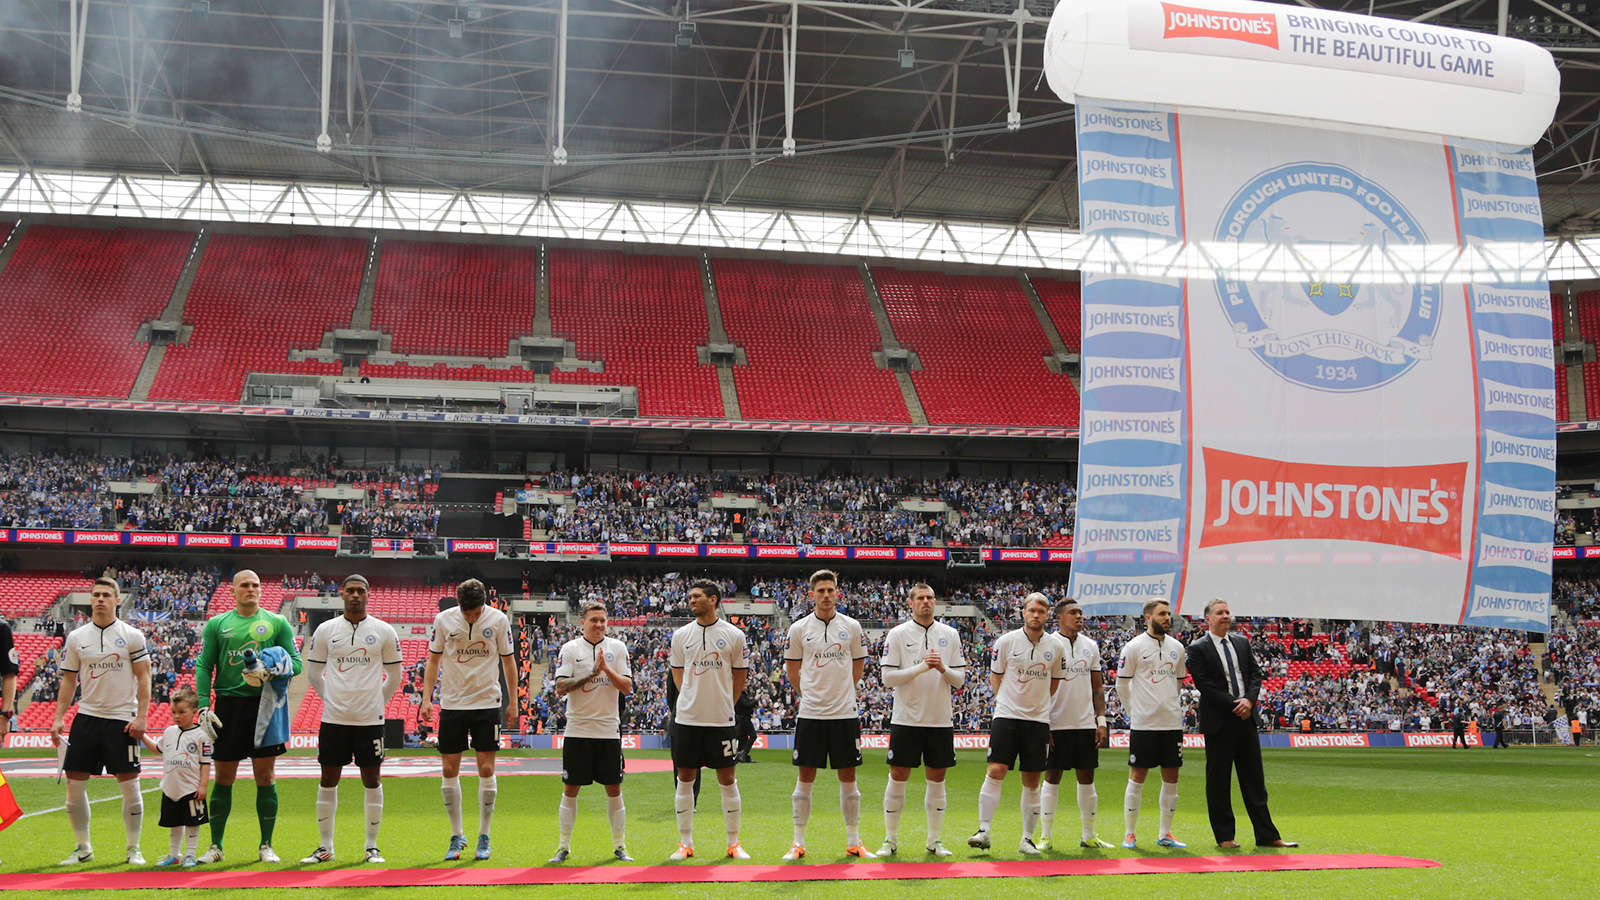 The Posh line-up ahead of the match at Wembley Stadium